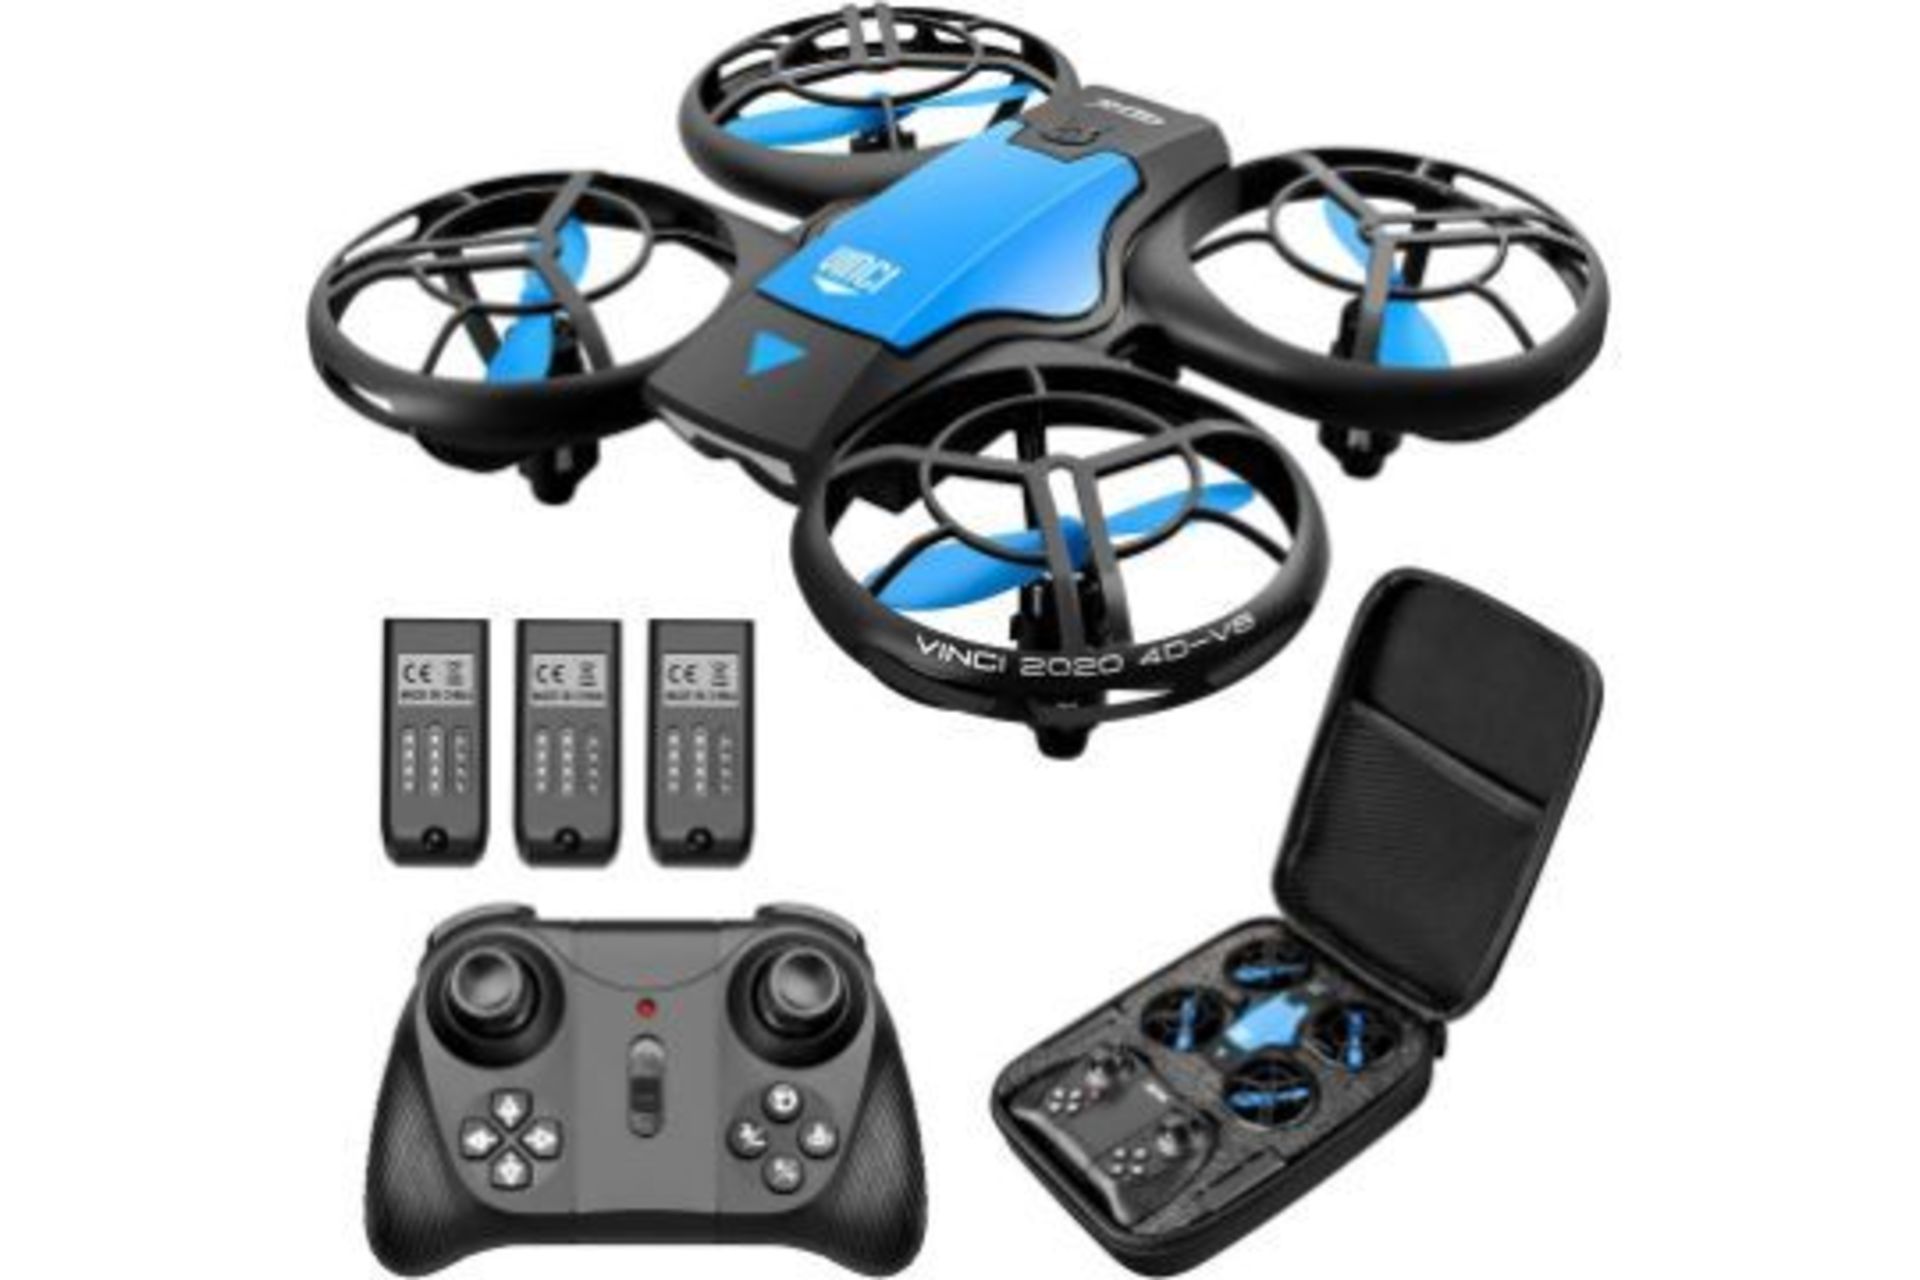 2 X 4DRC Mini Drone for Kids Hand Operated RC Quadcopter Longer Flight Time, (4DV8) Altitude Hold,